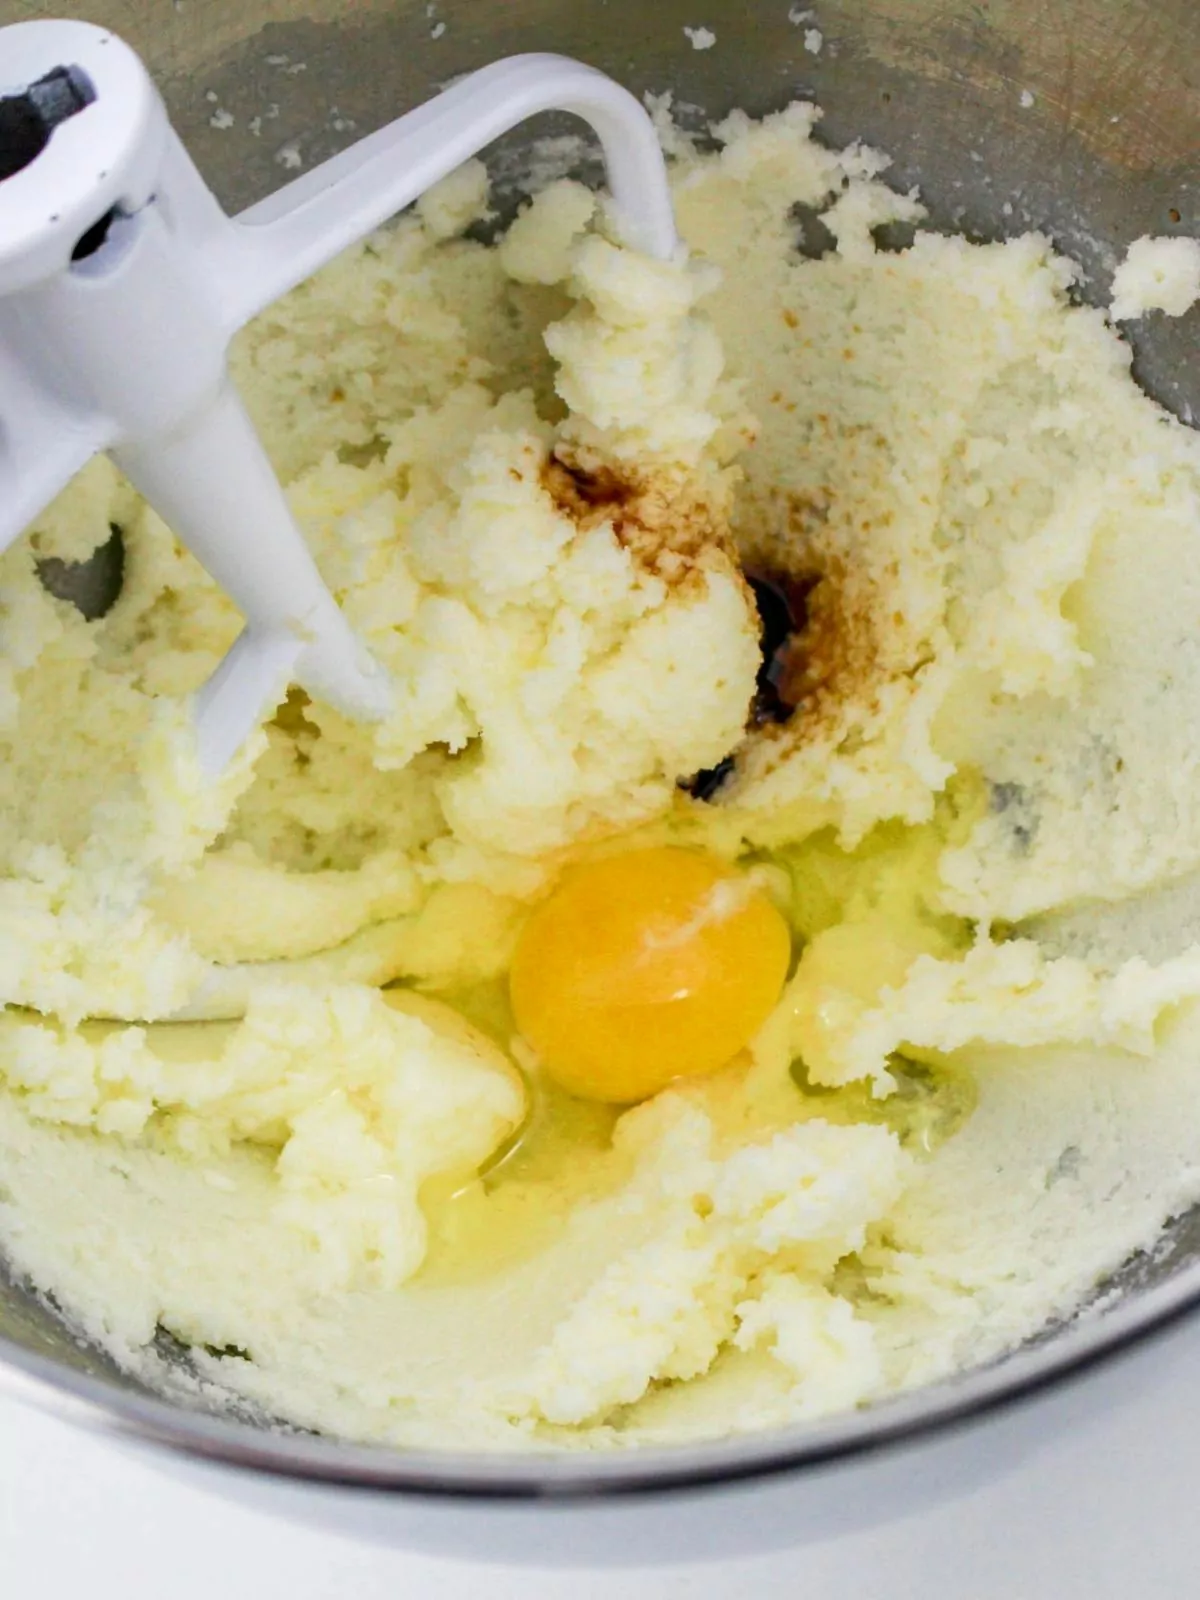 Combine butter with sugar and eggs in mixing bowl.